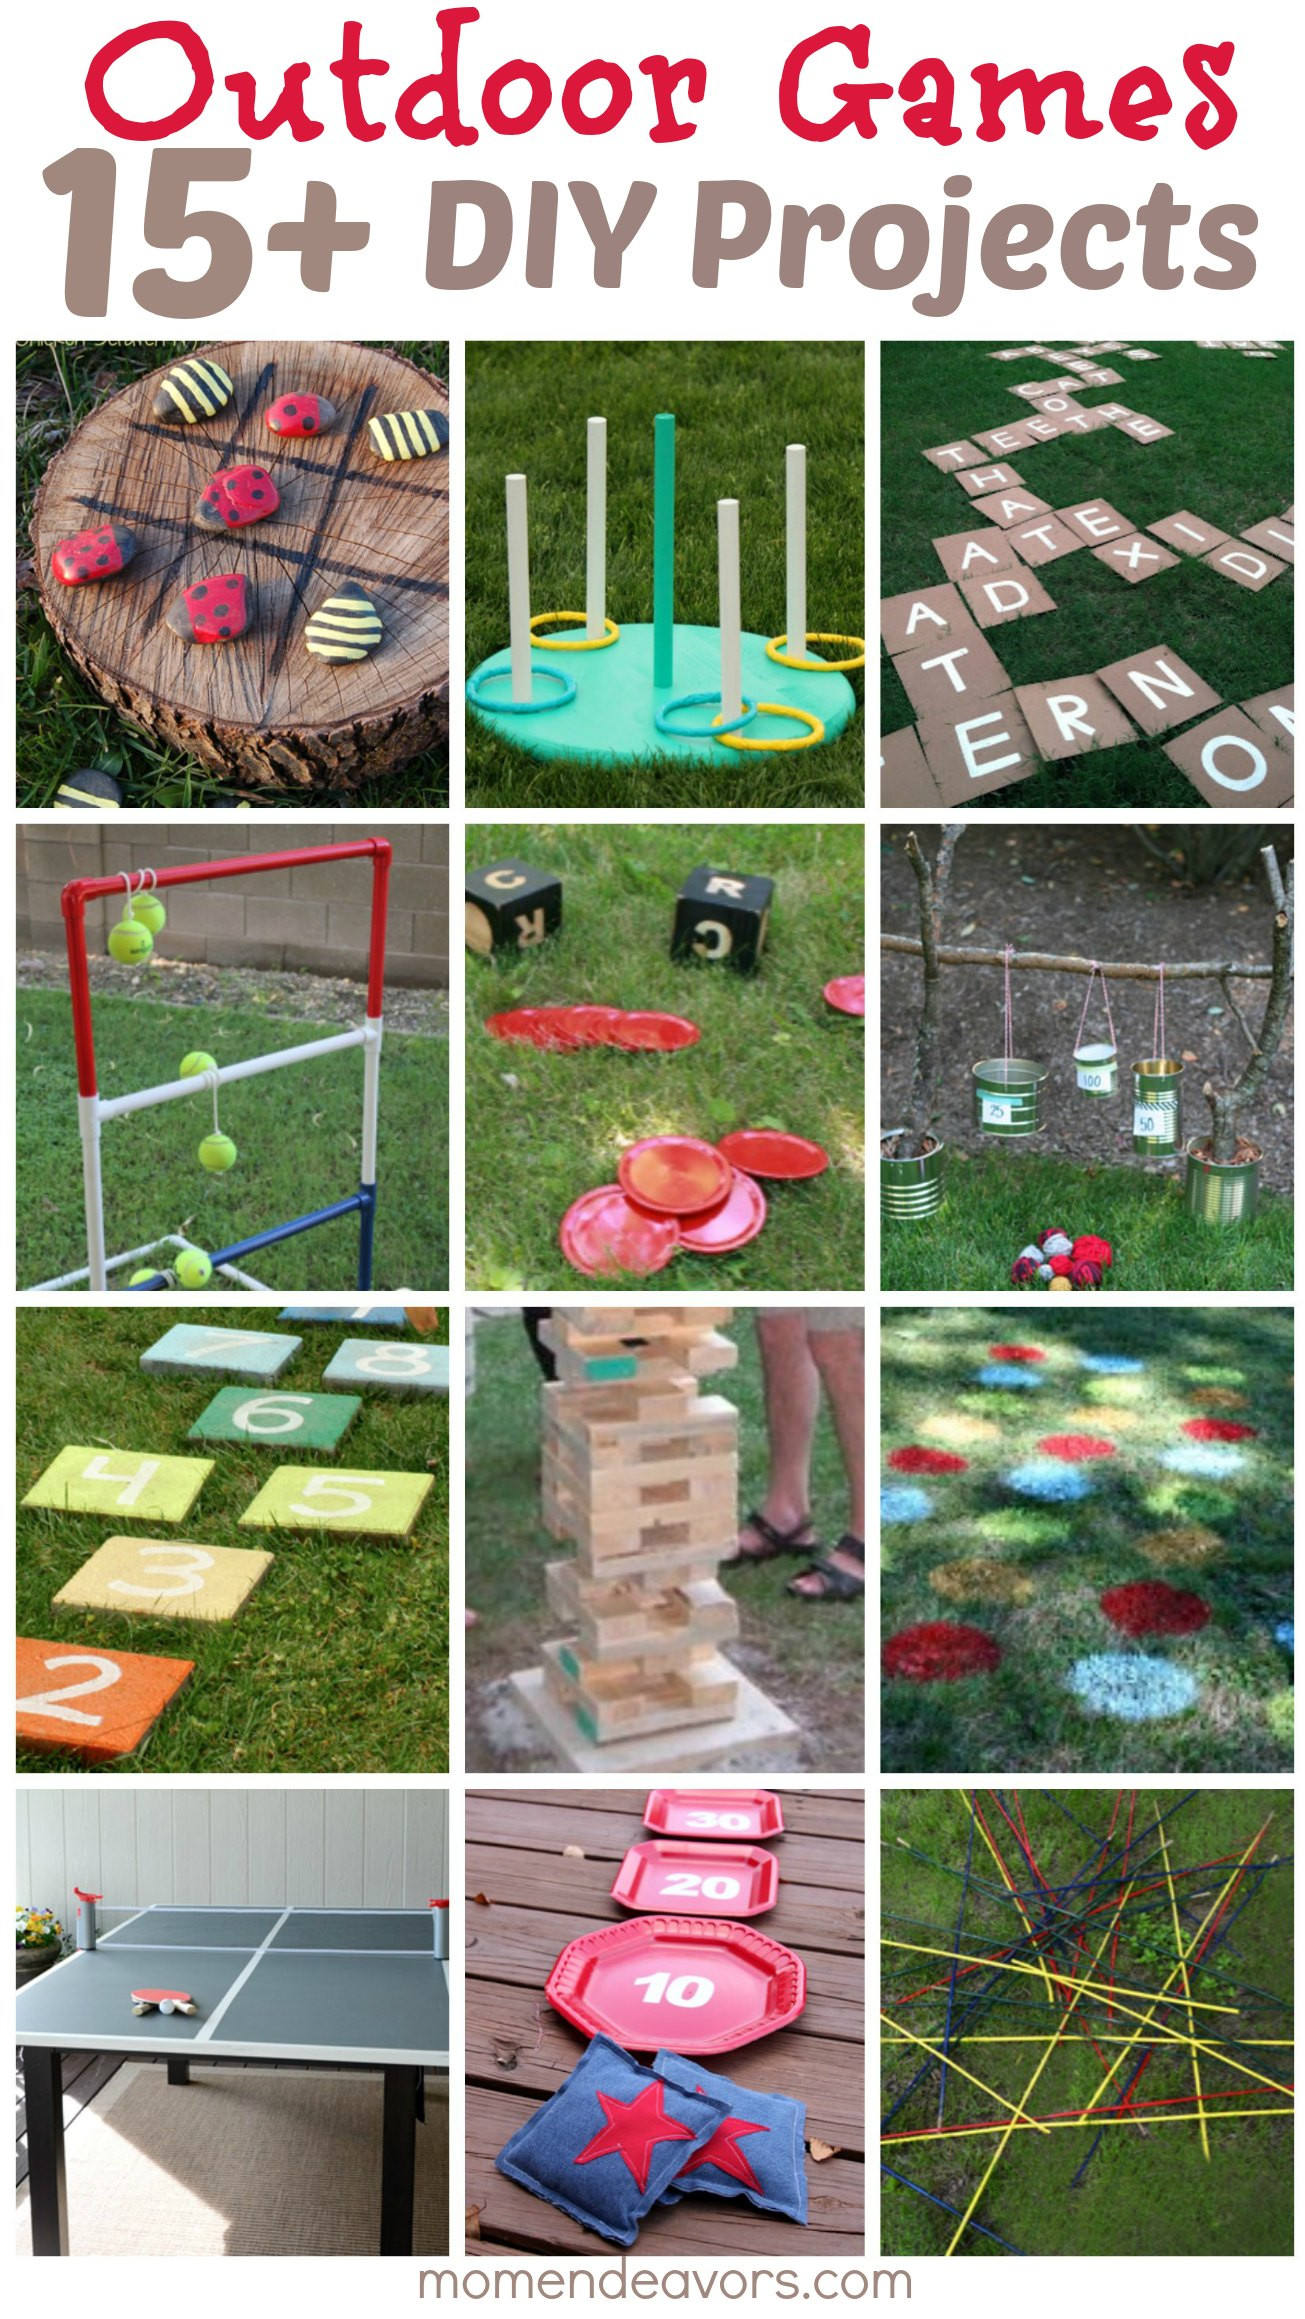 Fun Outdoor Games For Kids
 DIY Outdoor Games – 15 Awesome Project Ideas for Backyard